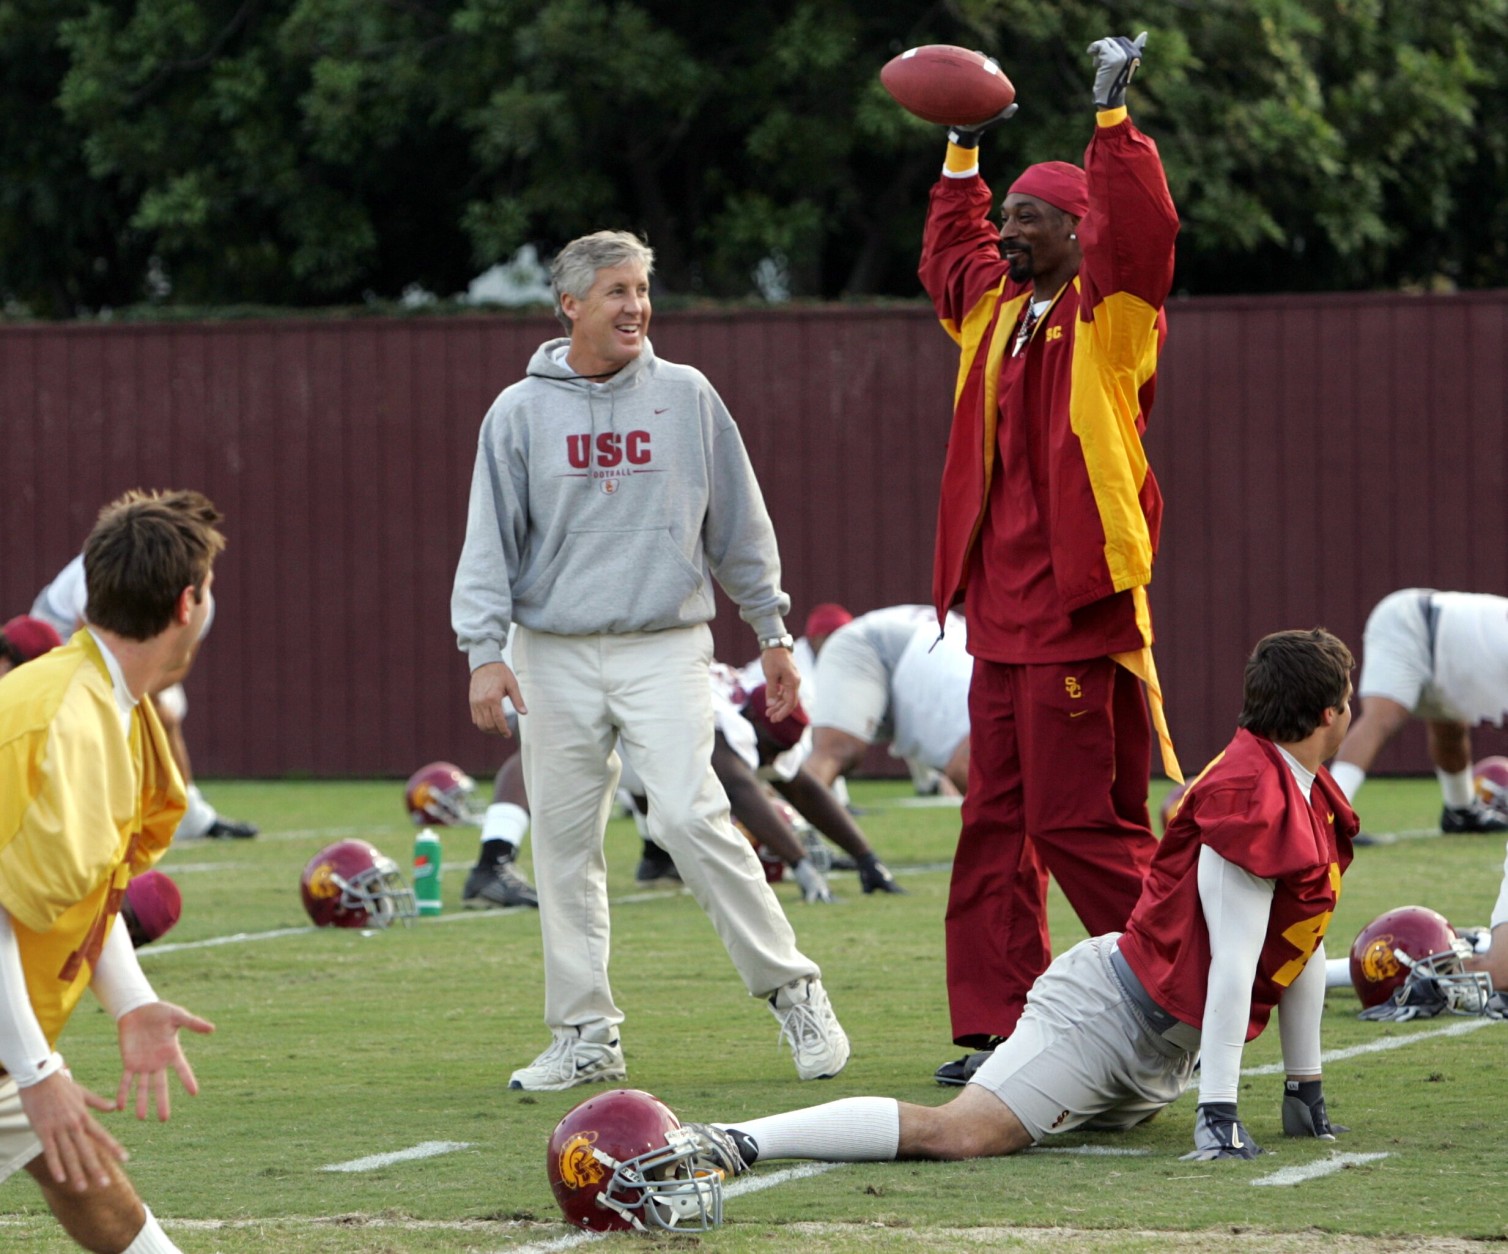 Rapper Snoop Dogg makes a visit to the University of California football team practice Tuesday, Nov. 16, 2004 in Los Angeles as coach Pete Carroll, left, looks on. Snoop donned football gloves, a red USC sweat suit and ran drills with the team. (AP Photo/Reed Saxon)